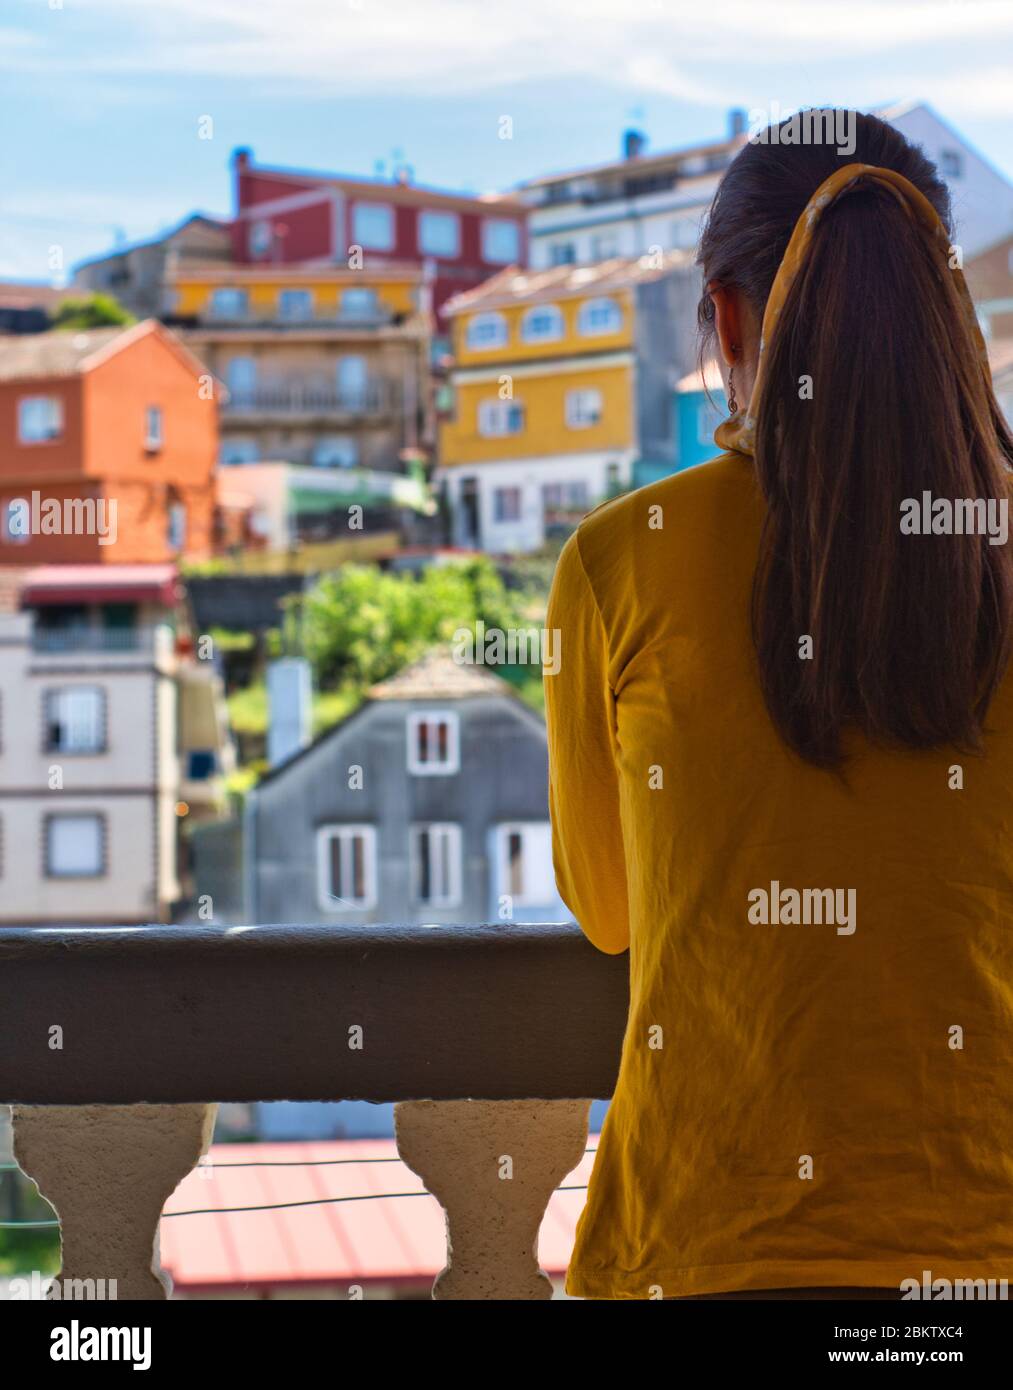 Young woman clapping her hands on the balcony to showi gratitude to all healthcare workers during the coronavirus outbreak. Lots of colorful houses. Stock Photo